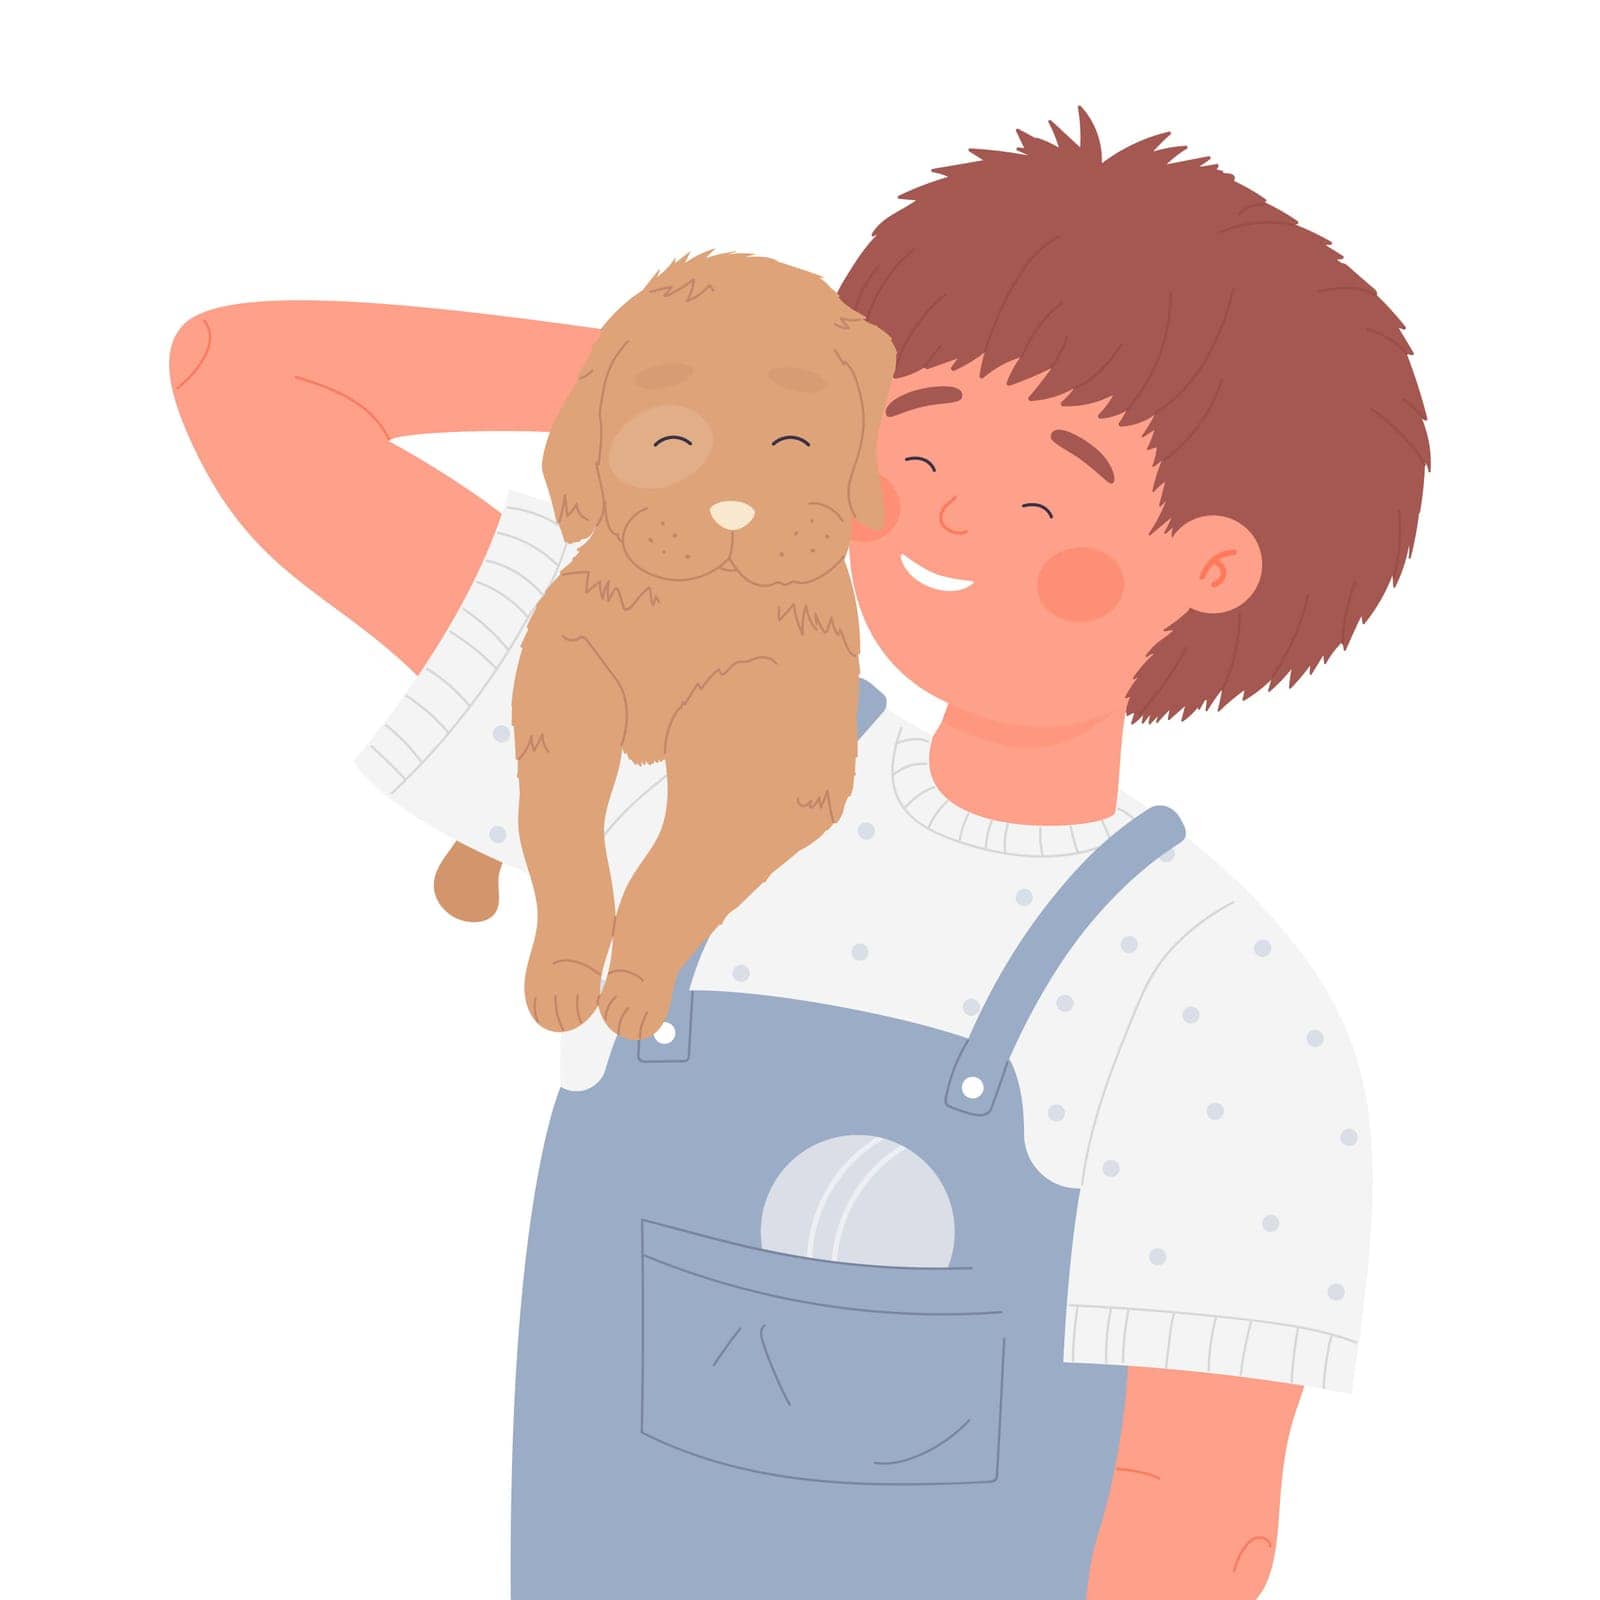 Cheerful kid with lovely pet by Popov